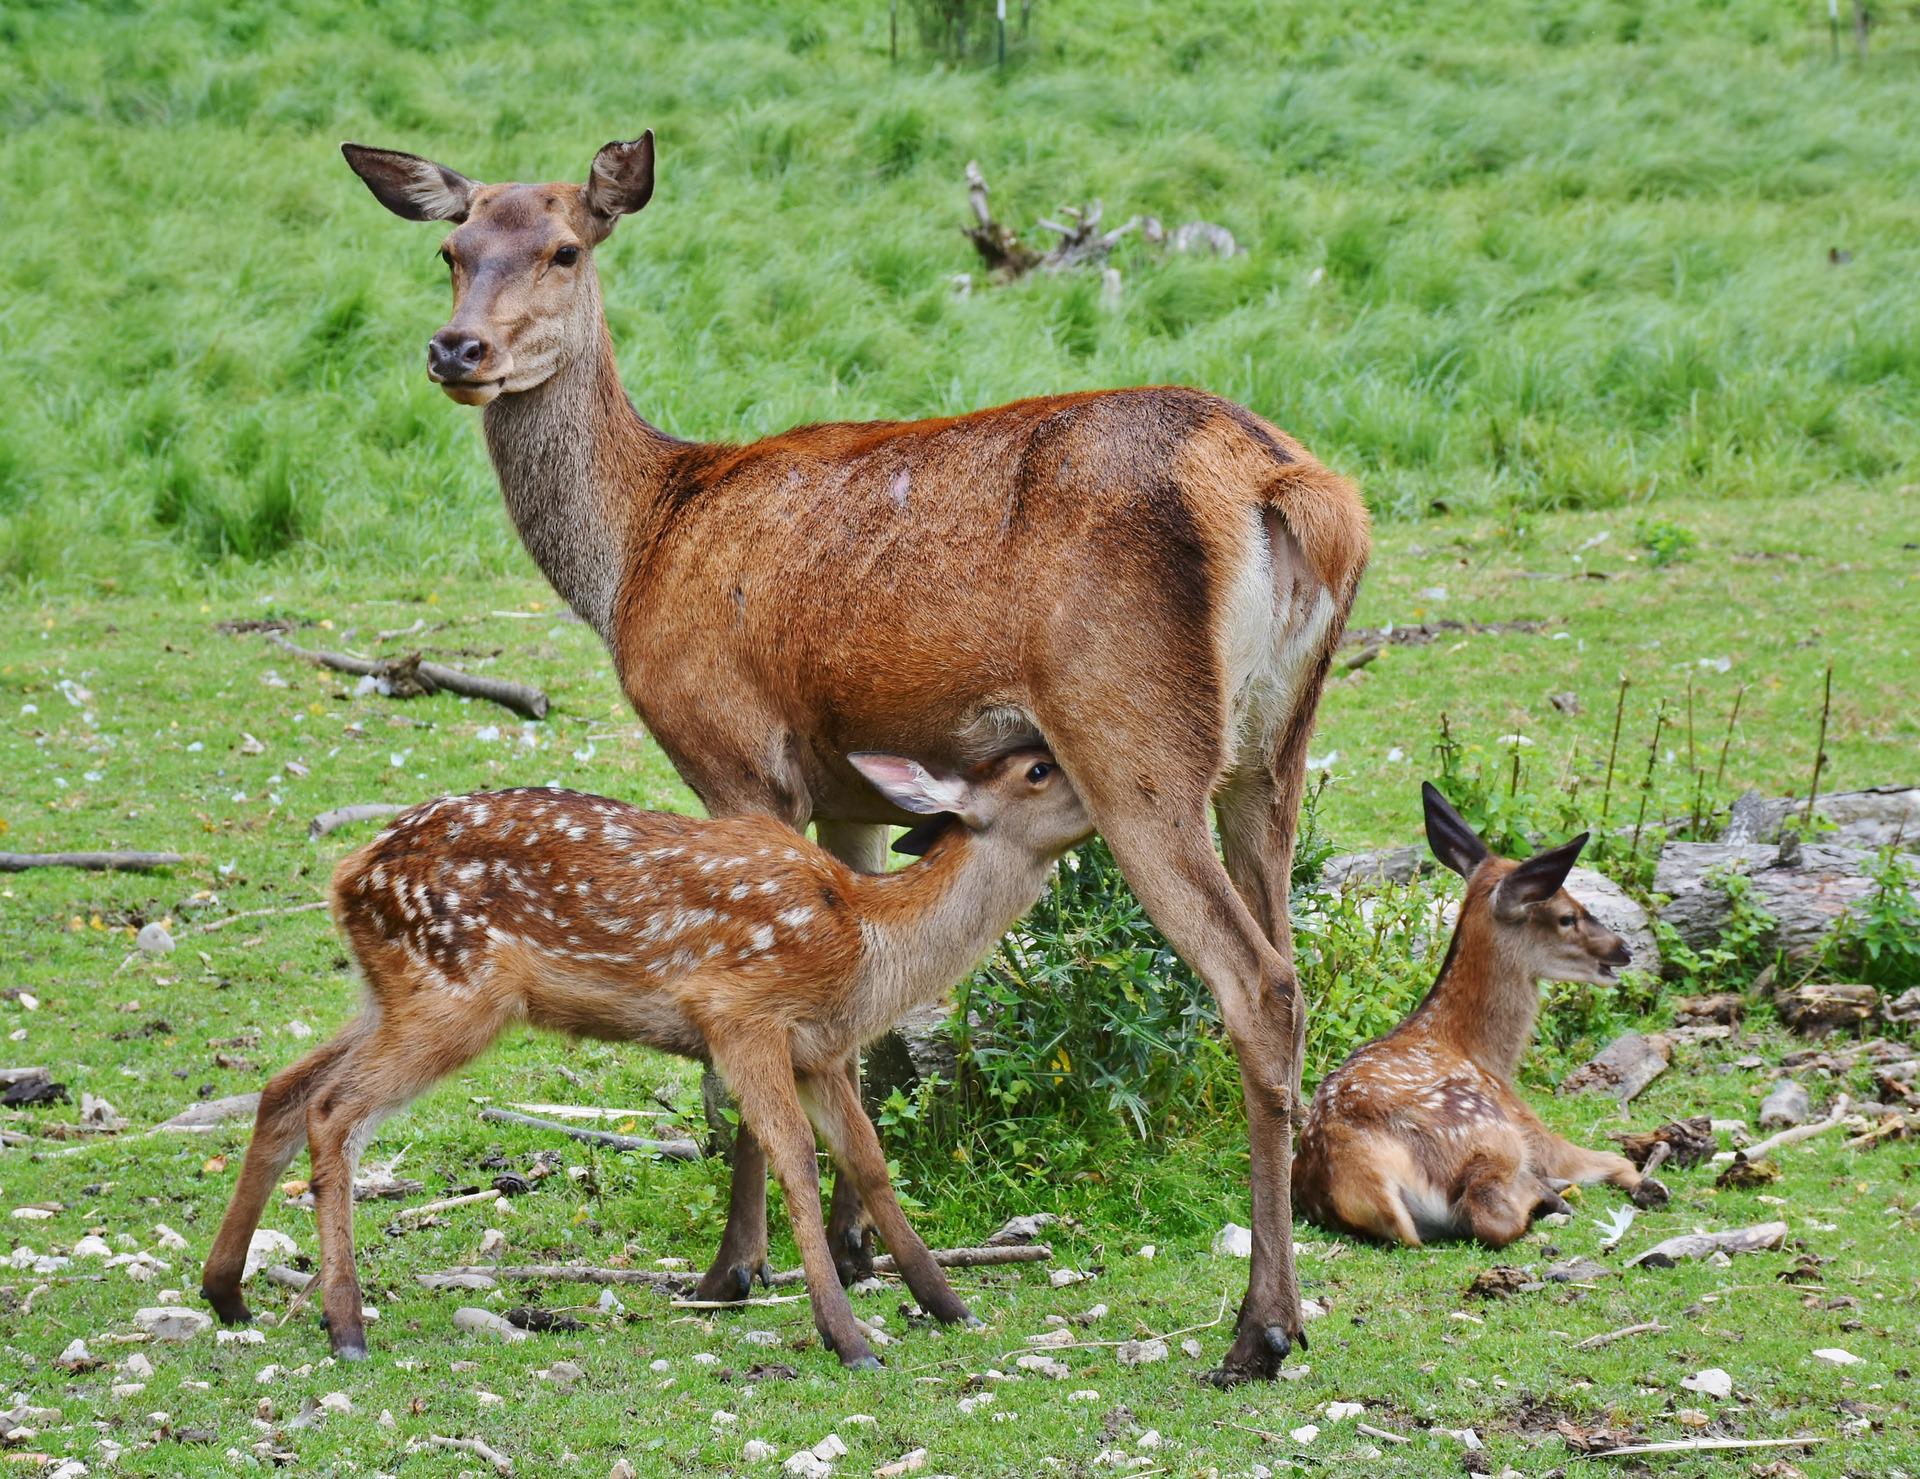 Red deer hind with 2 calves-one nursing and one bedded behind